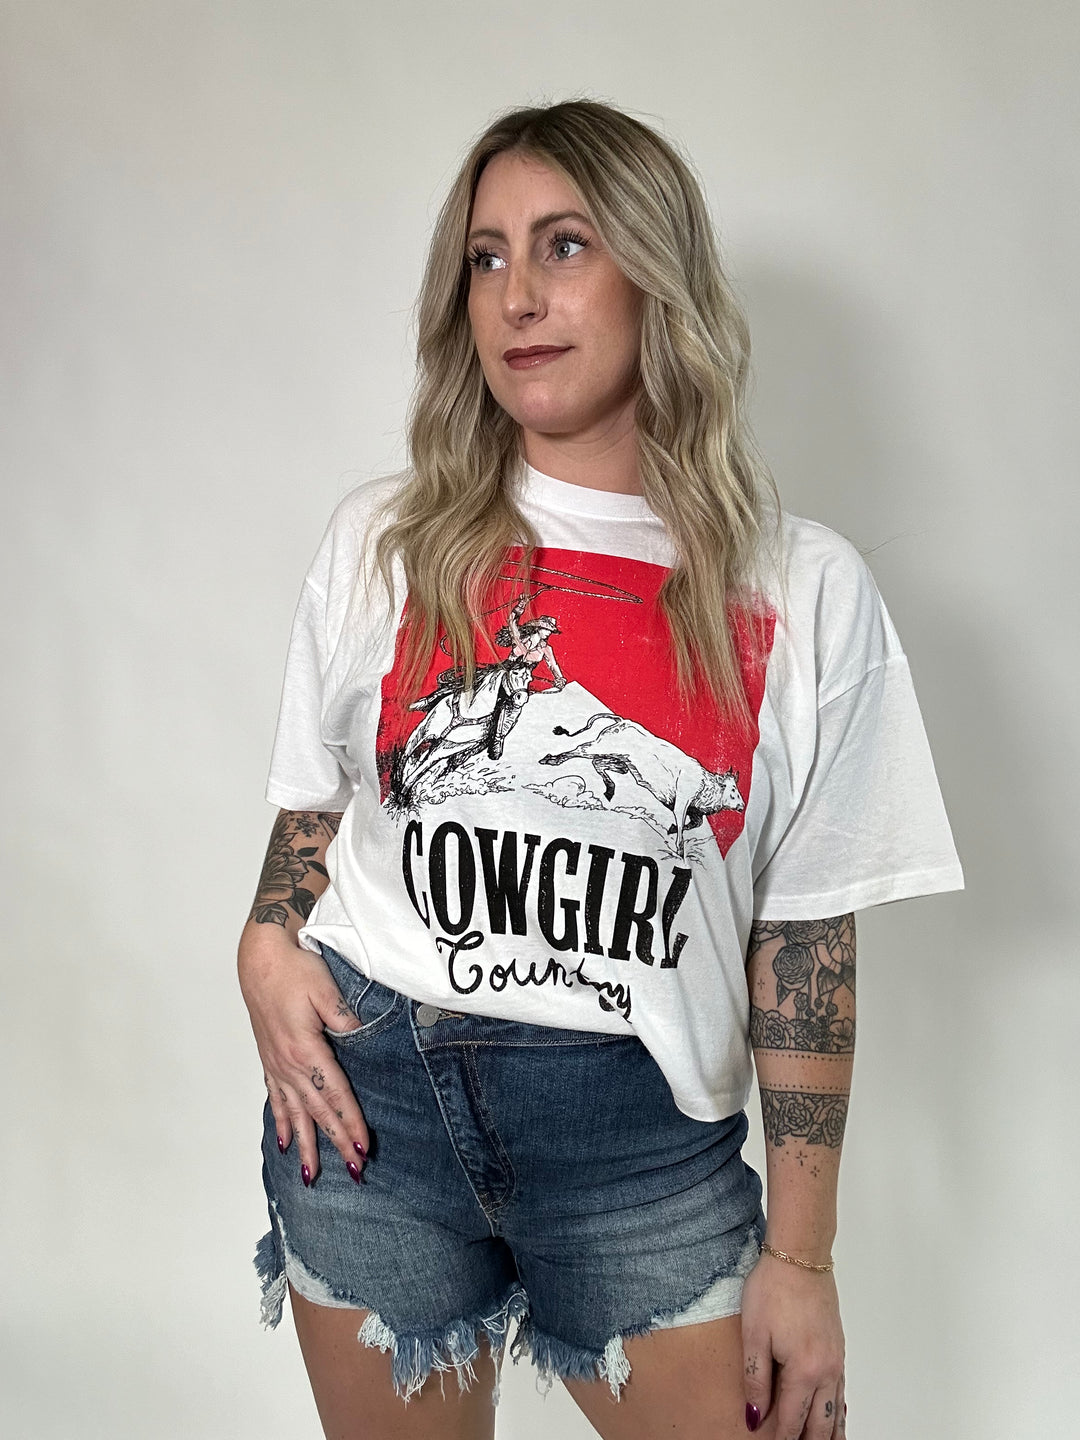 Cowgirl Country Crop Tee